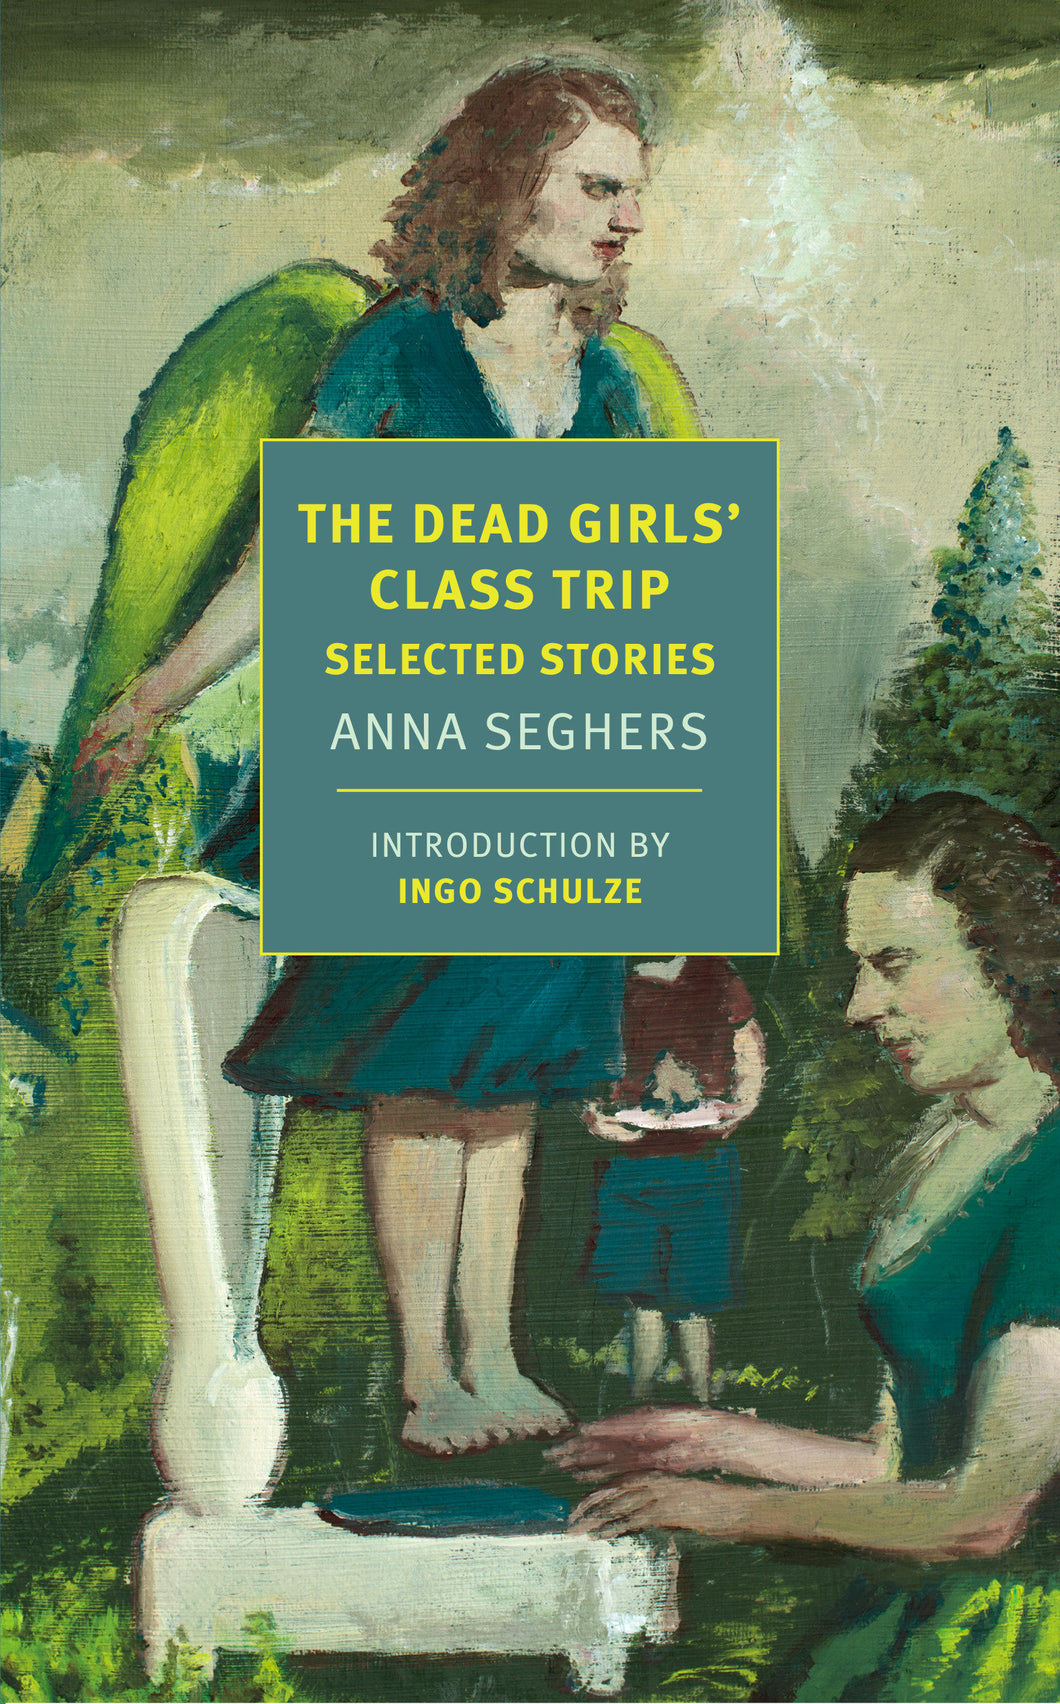 The Dead Girls' Class Trip: Selected Stories